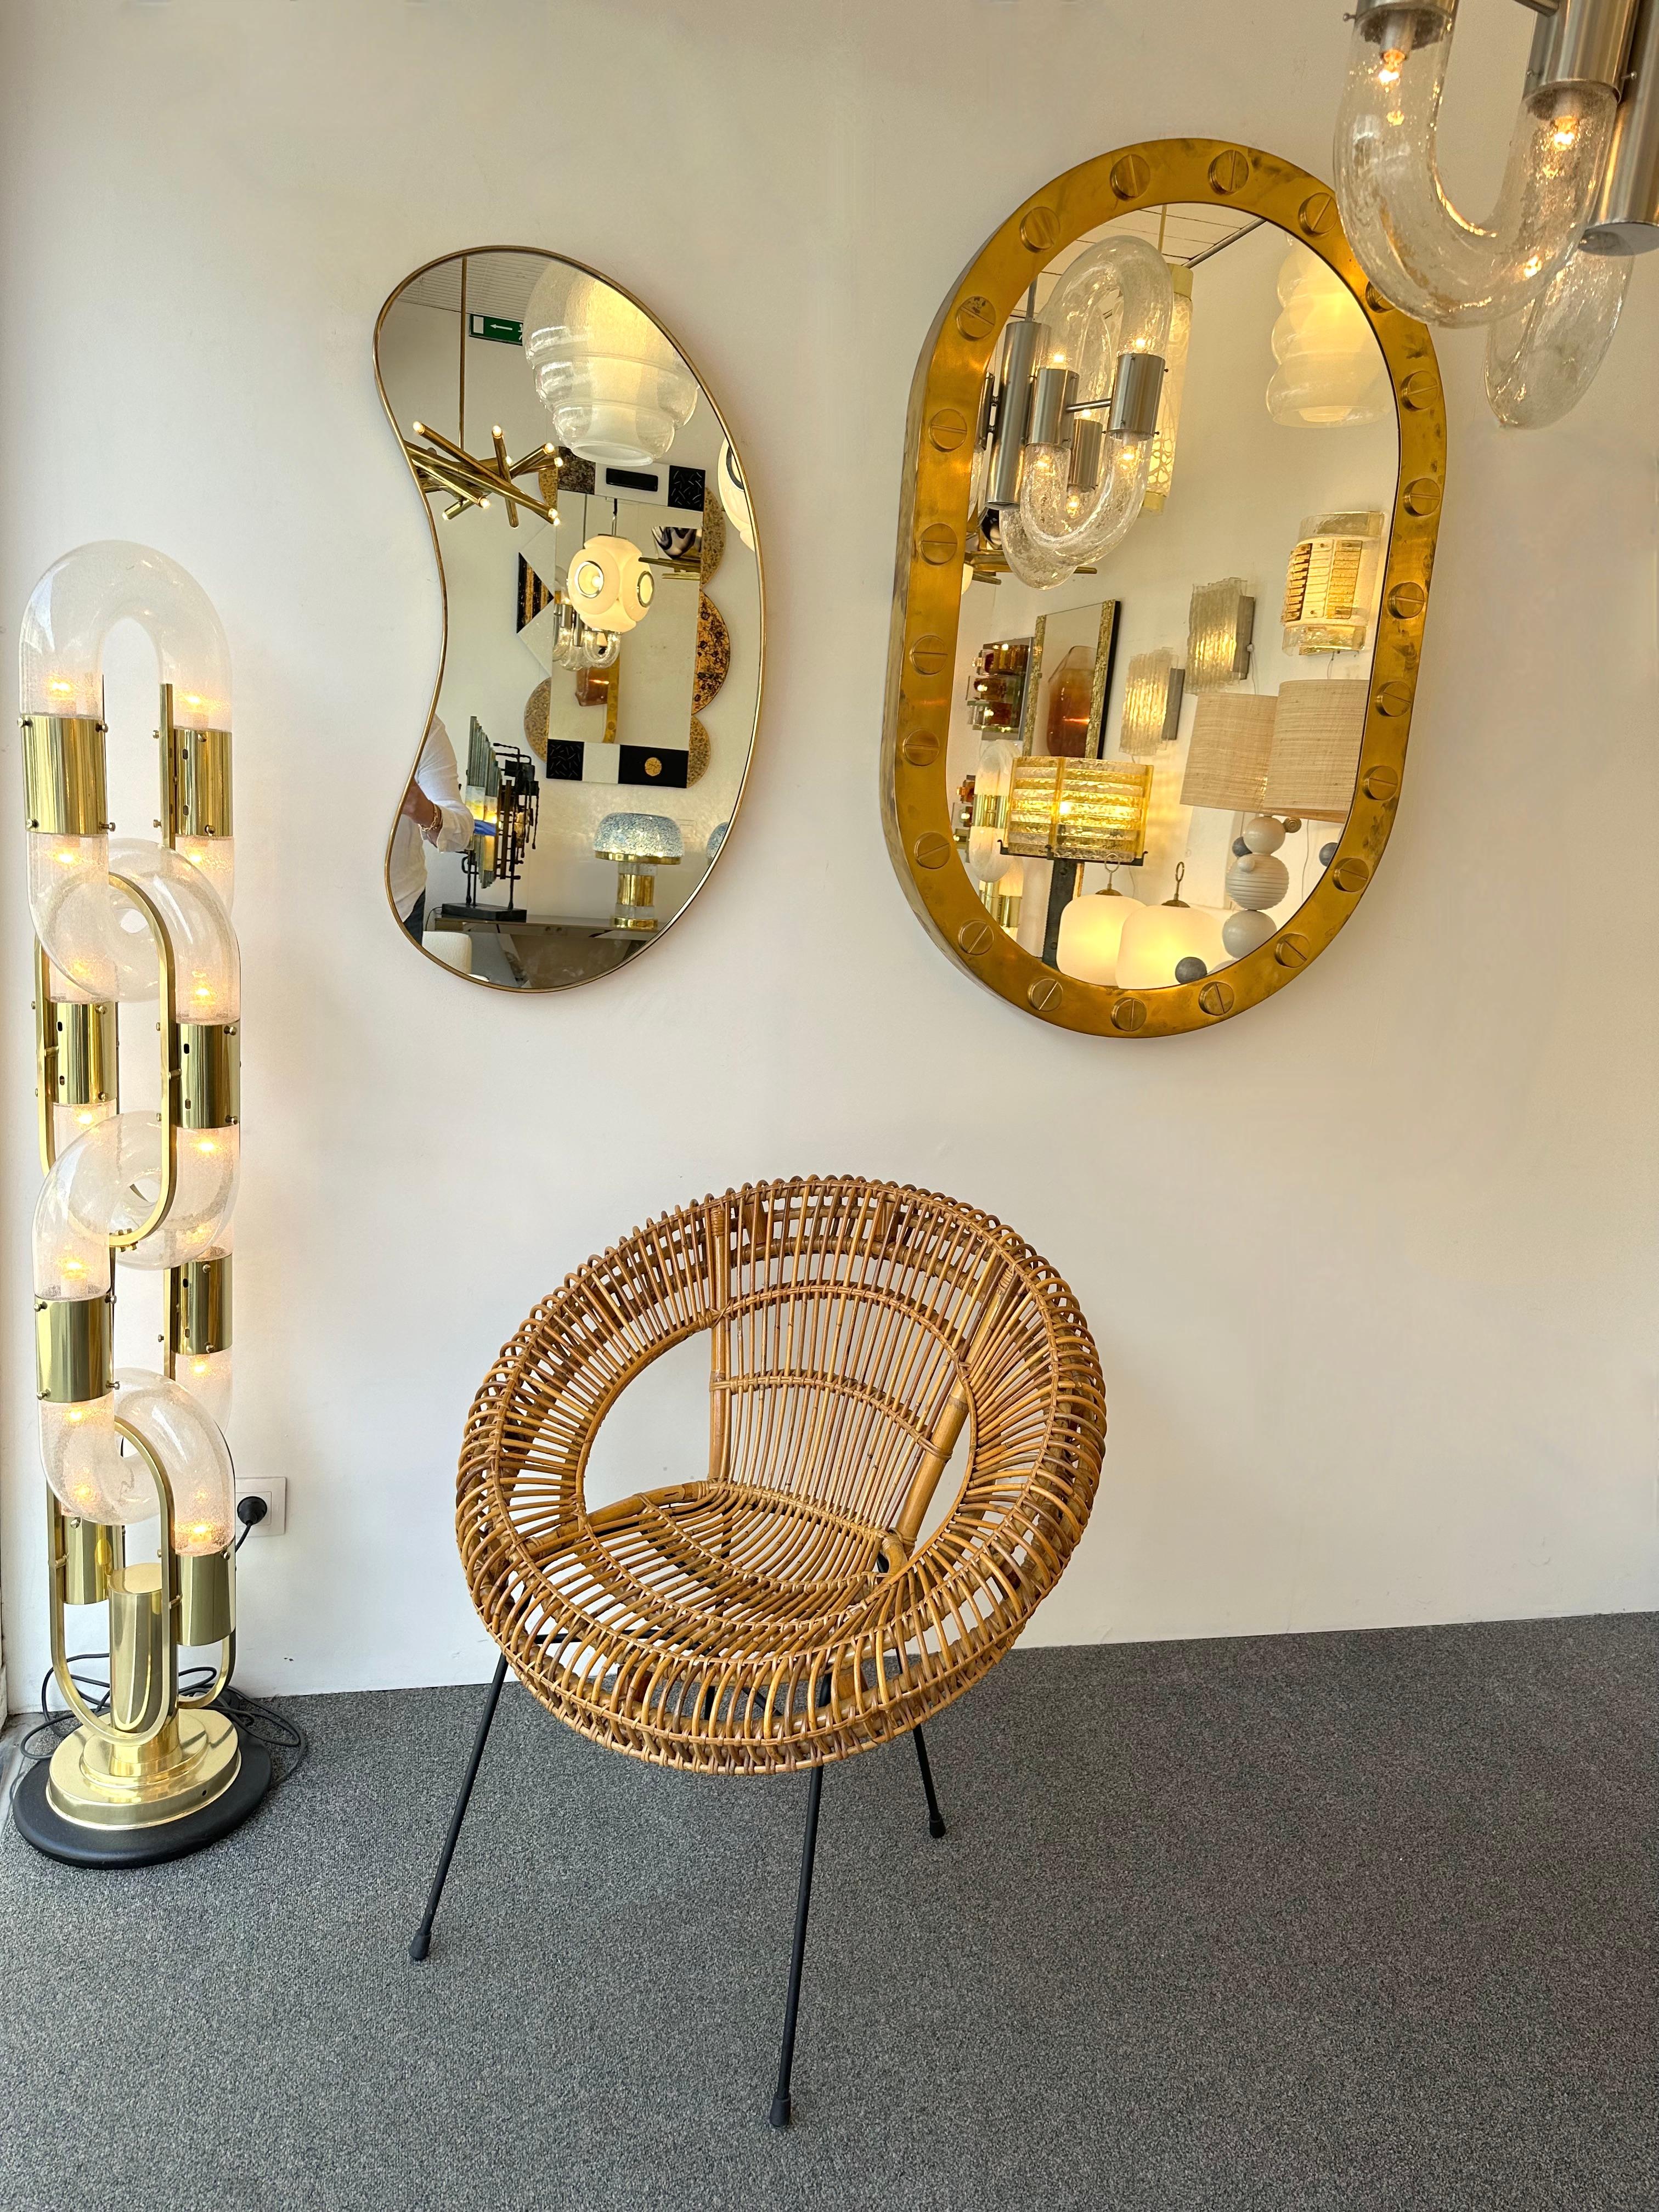 Brass free form bean haricot wall mirror. Nice patina. In the mood of Garouste and Bonetti, Hubert Le Gall, Franck Evenou, Gio Ponti, Fontana Arte.

2 mirror available.
Price listed by mirror. In sale separately.
For a pair set of 2 please